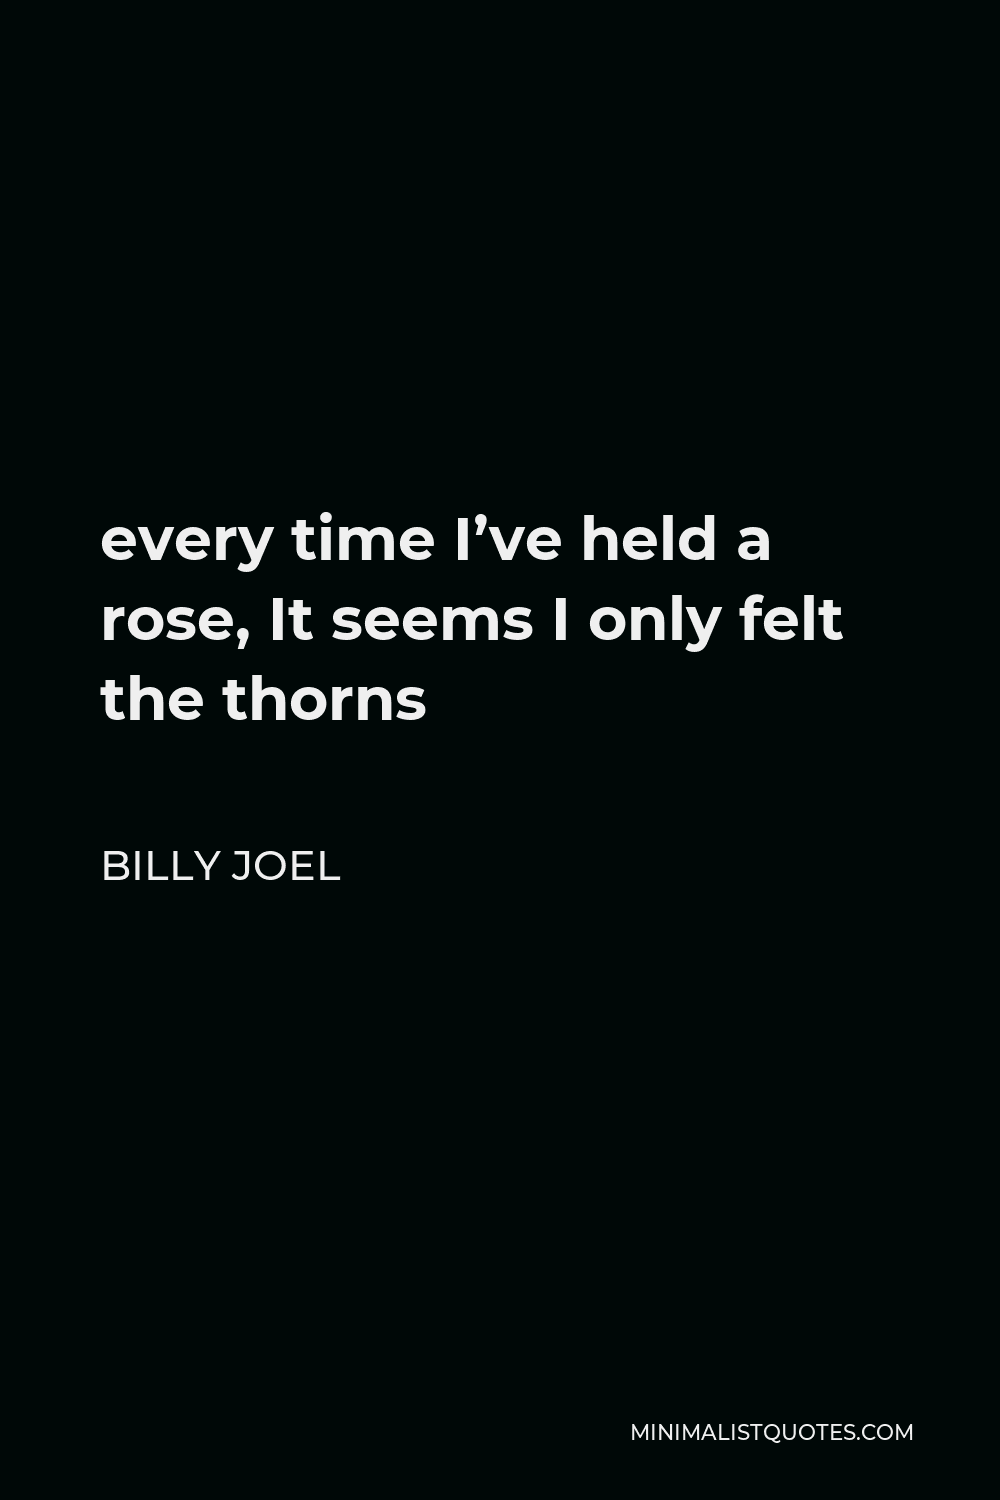 Billy Joel Quote - every time I’ve held a rose, It seems I only felt the thorns